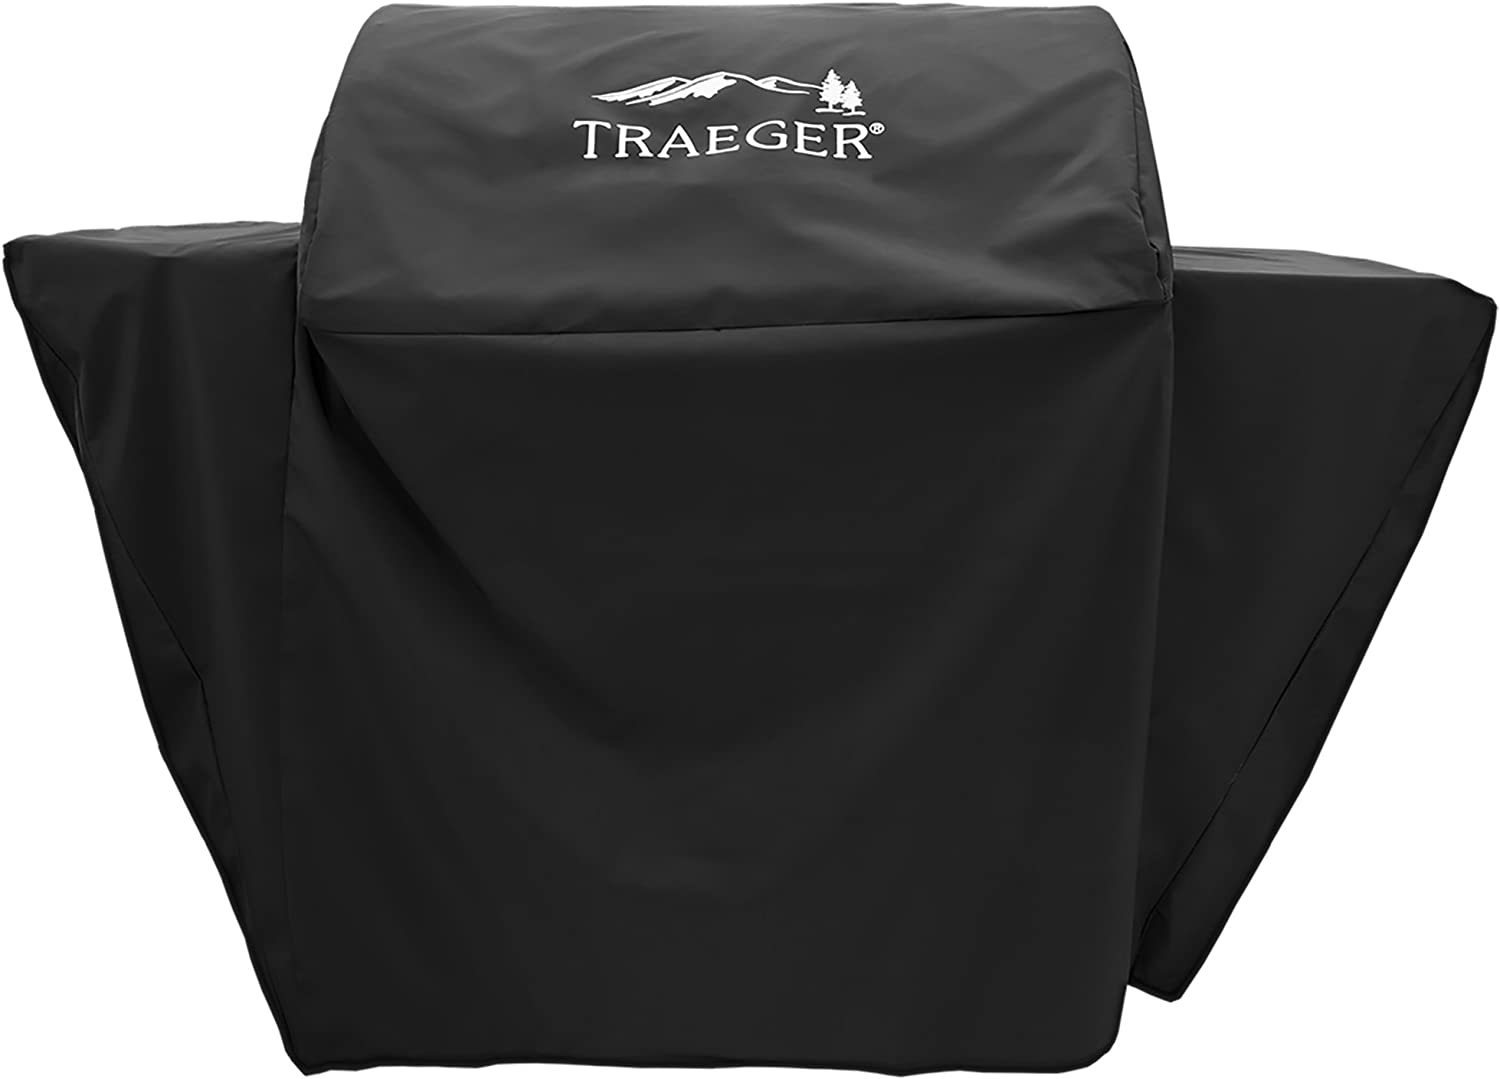 Traeger Full-Length Grill Cover - Select - $116.99